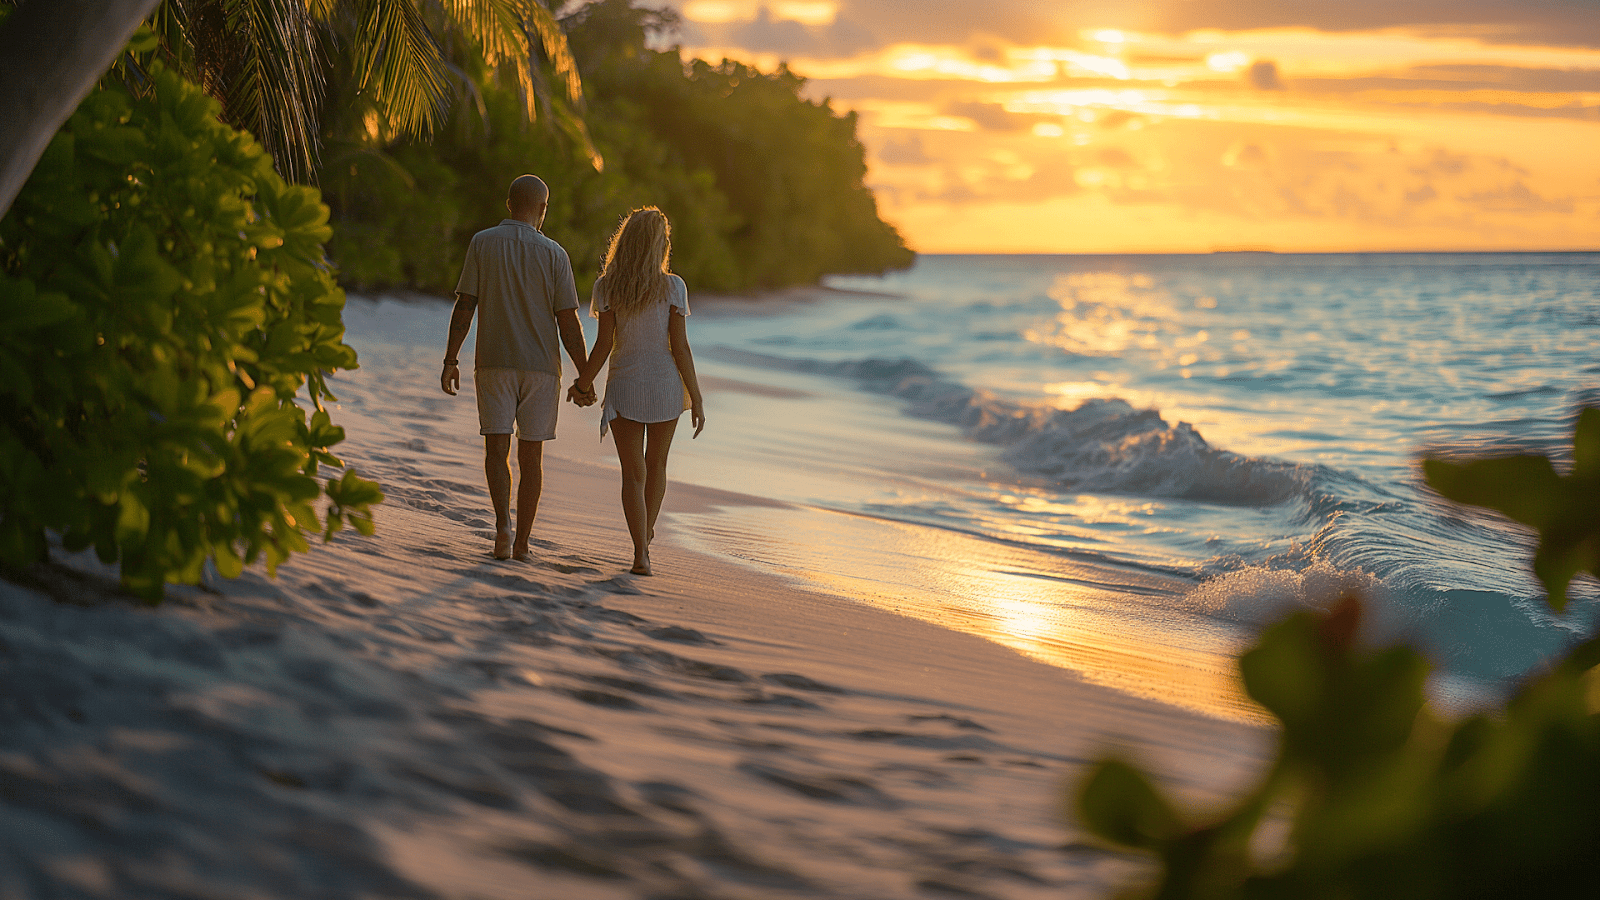 A couple walking hand in hand along the beach at sunset in the Maldives.